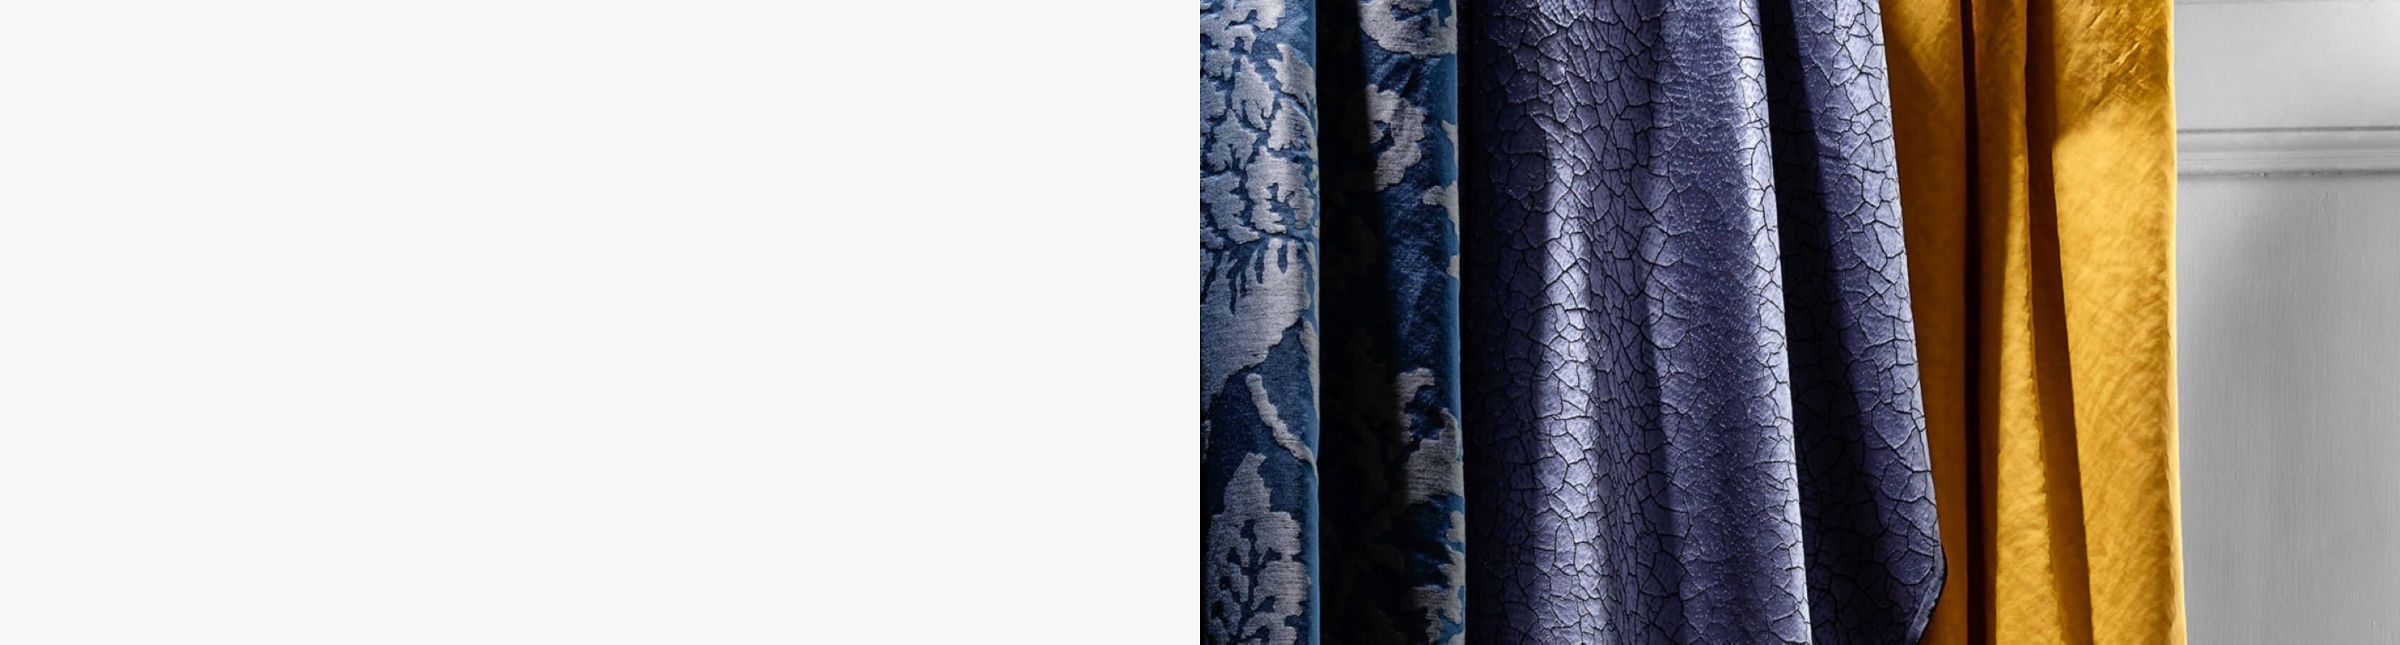 a close up crop of luxurious curtains